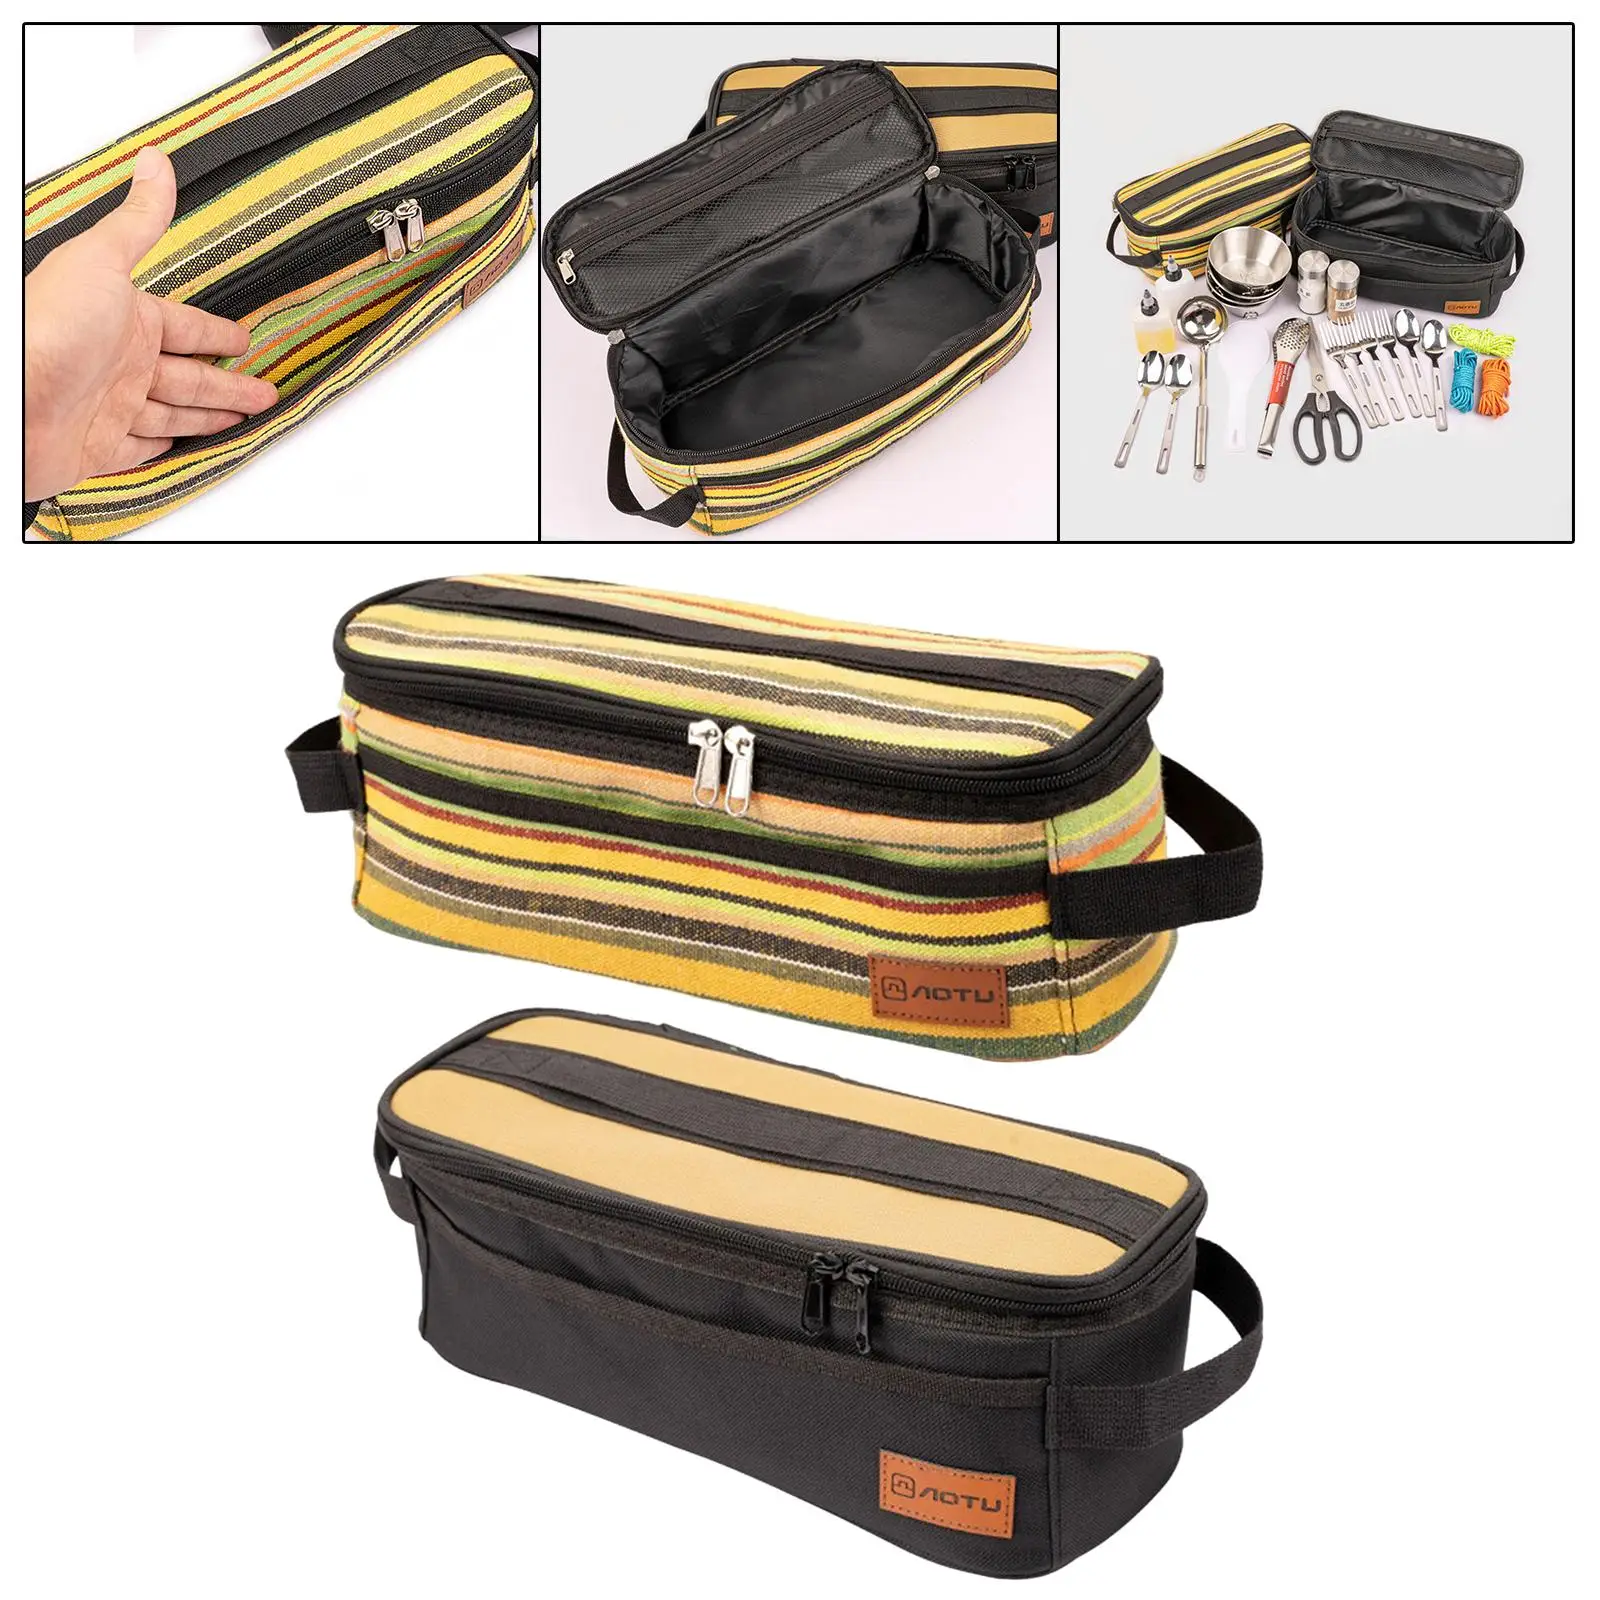 Camping Cookware Storage Bag Easily Clean and Store for Family Barbecue Party